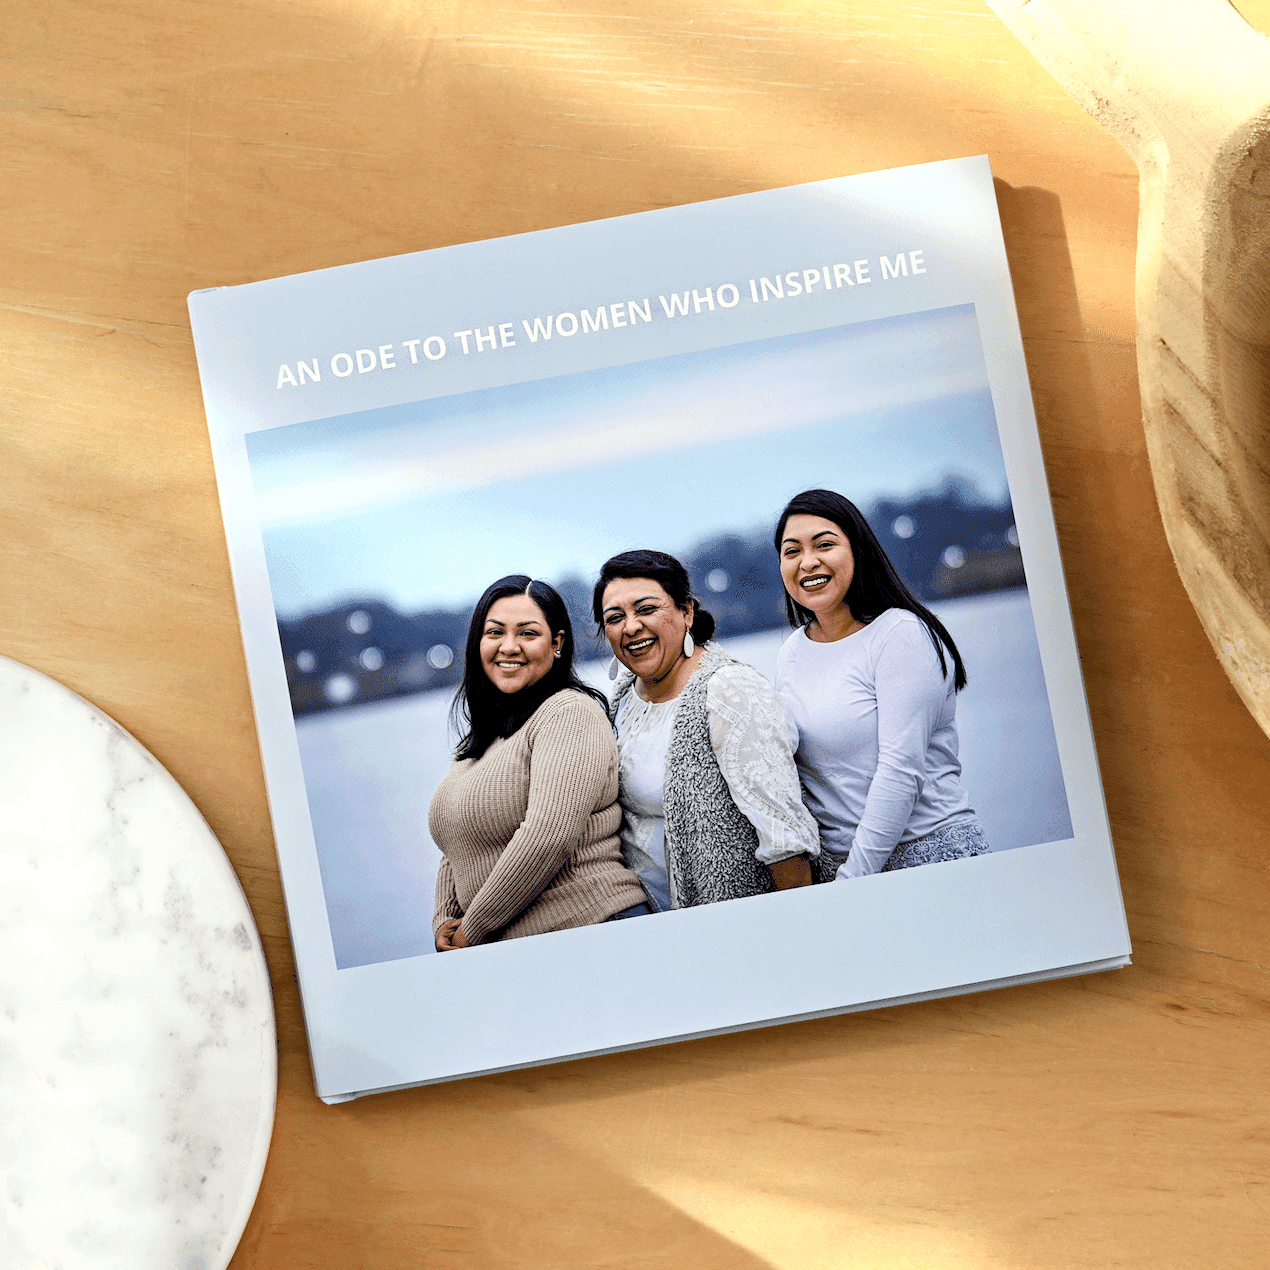 An Ode to the Women Who Inspire Me photobook showcasing inspirational women for Mother's Day.